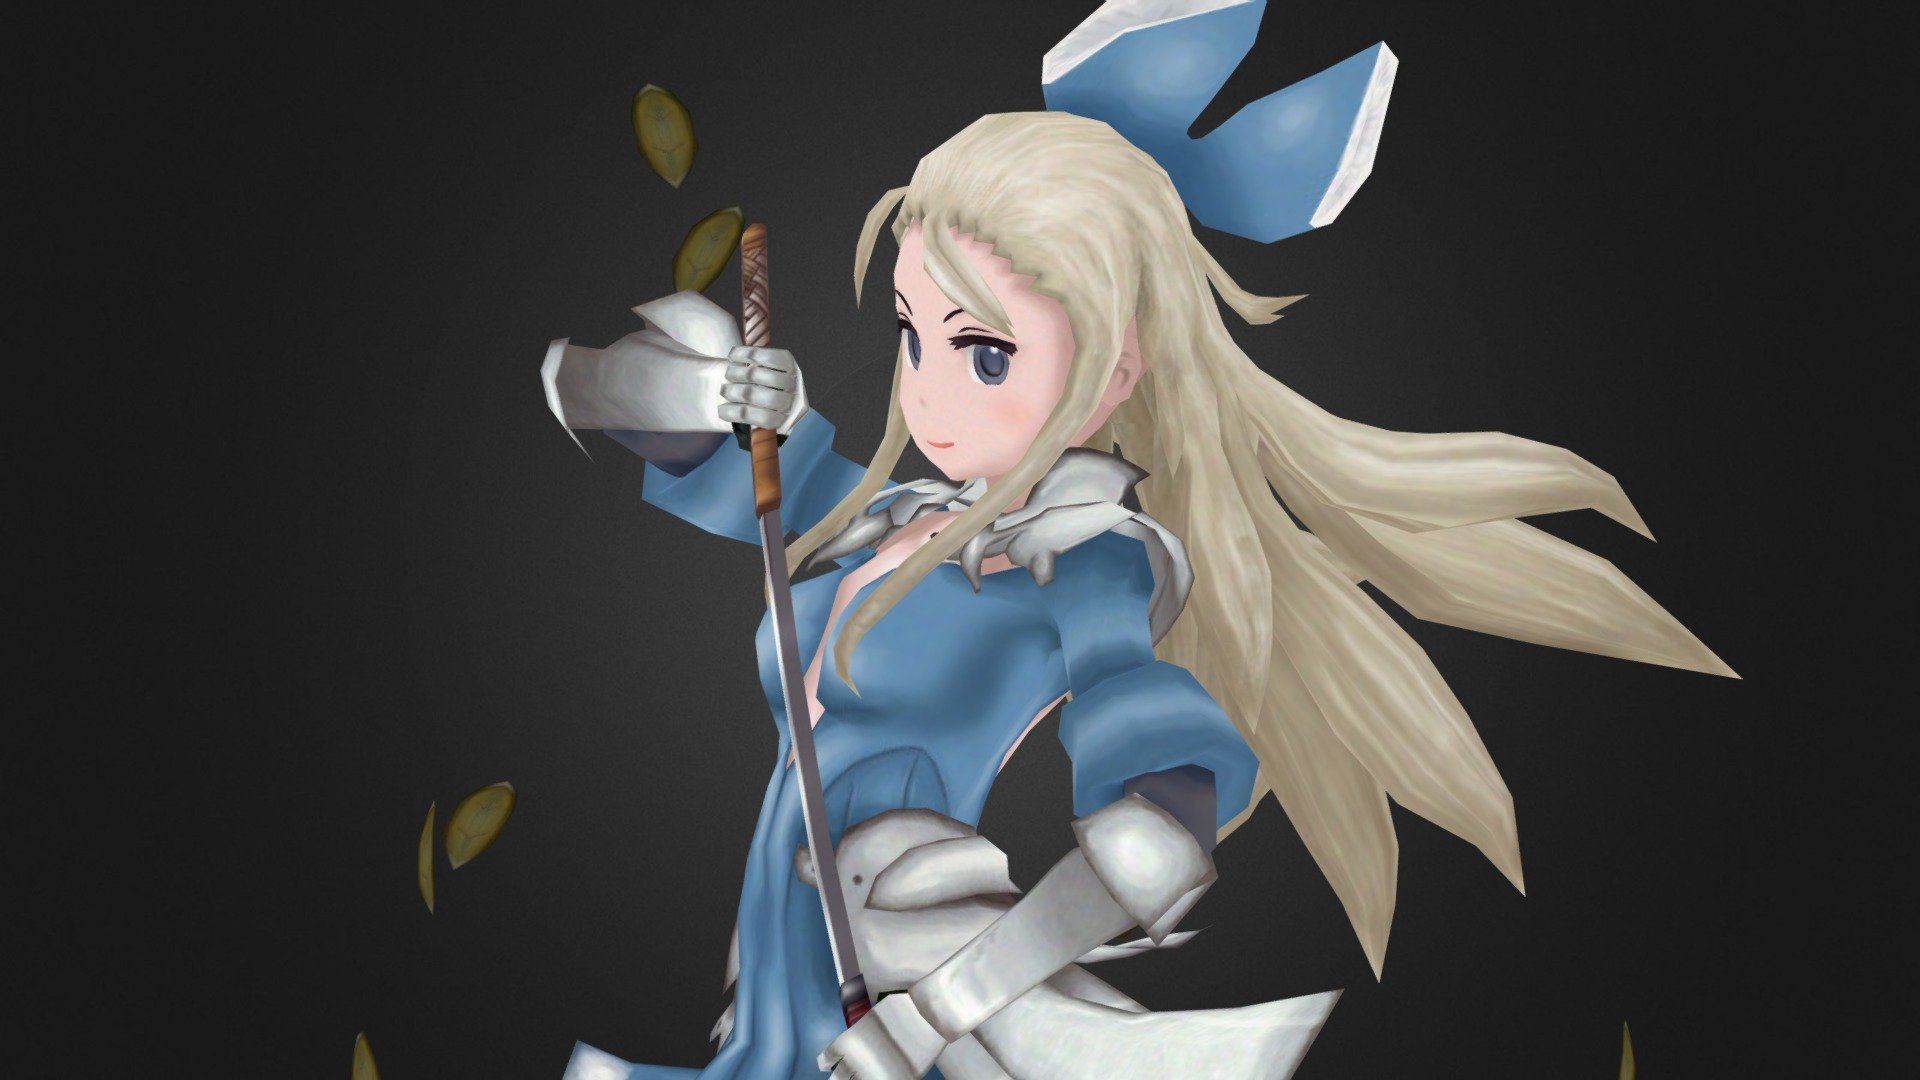 Edea Lee - Bravely Second: End Layer - 3D model by NaHa (@Nao_O) [07b83c3]